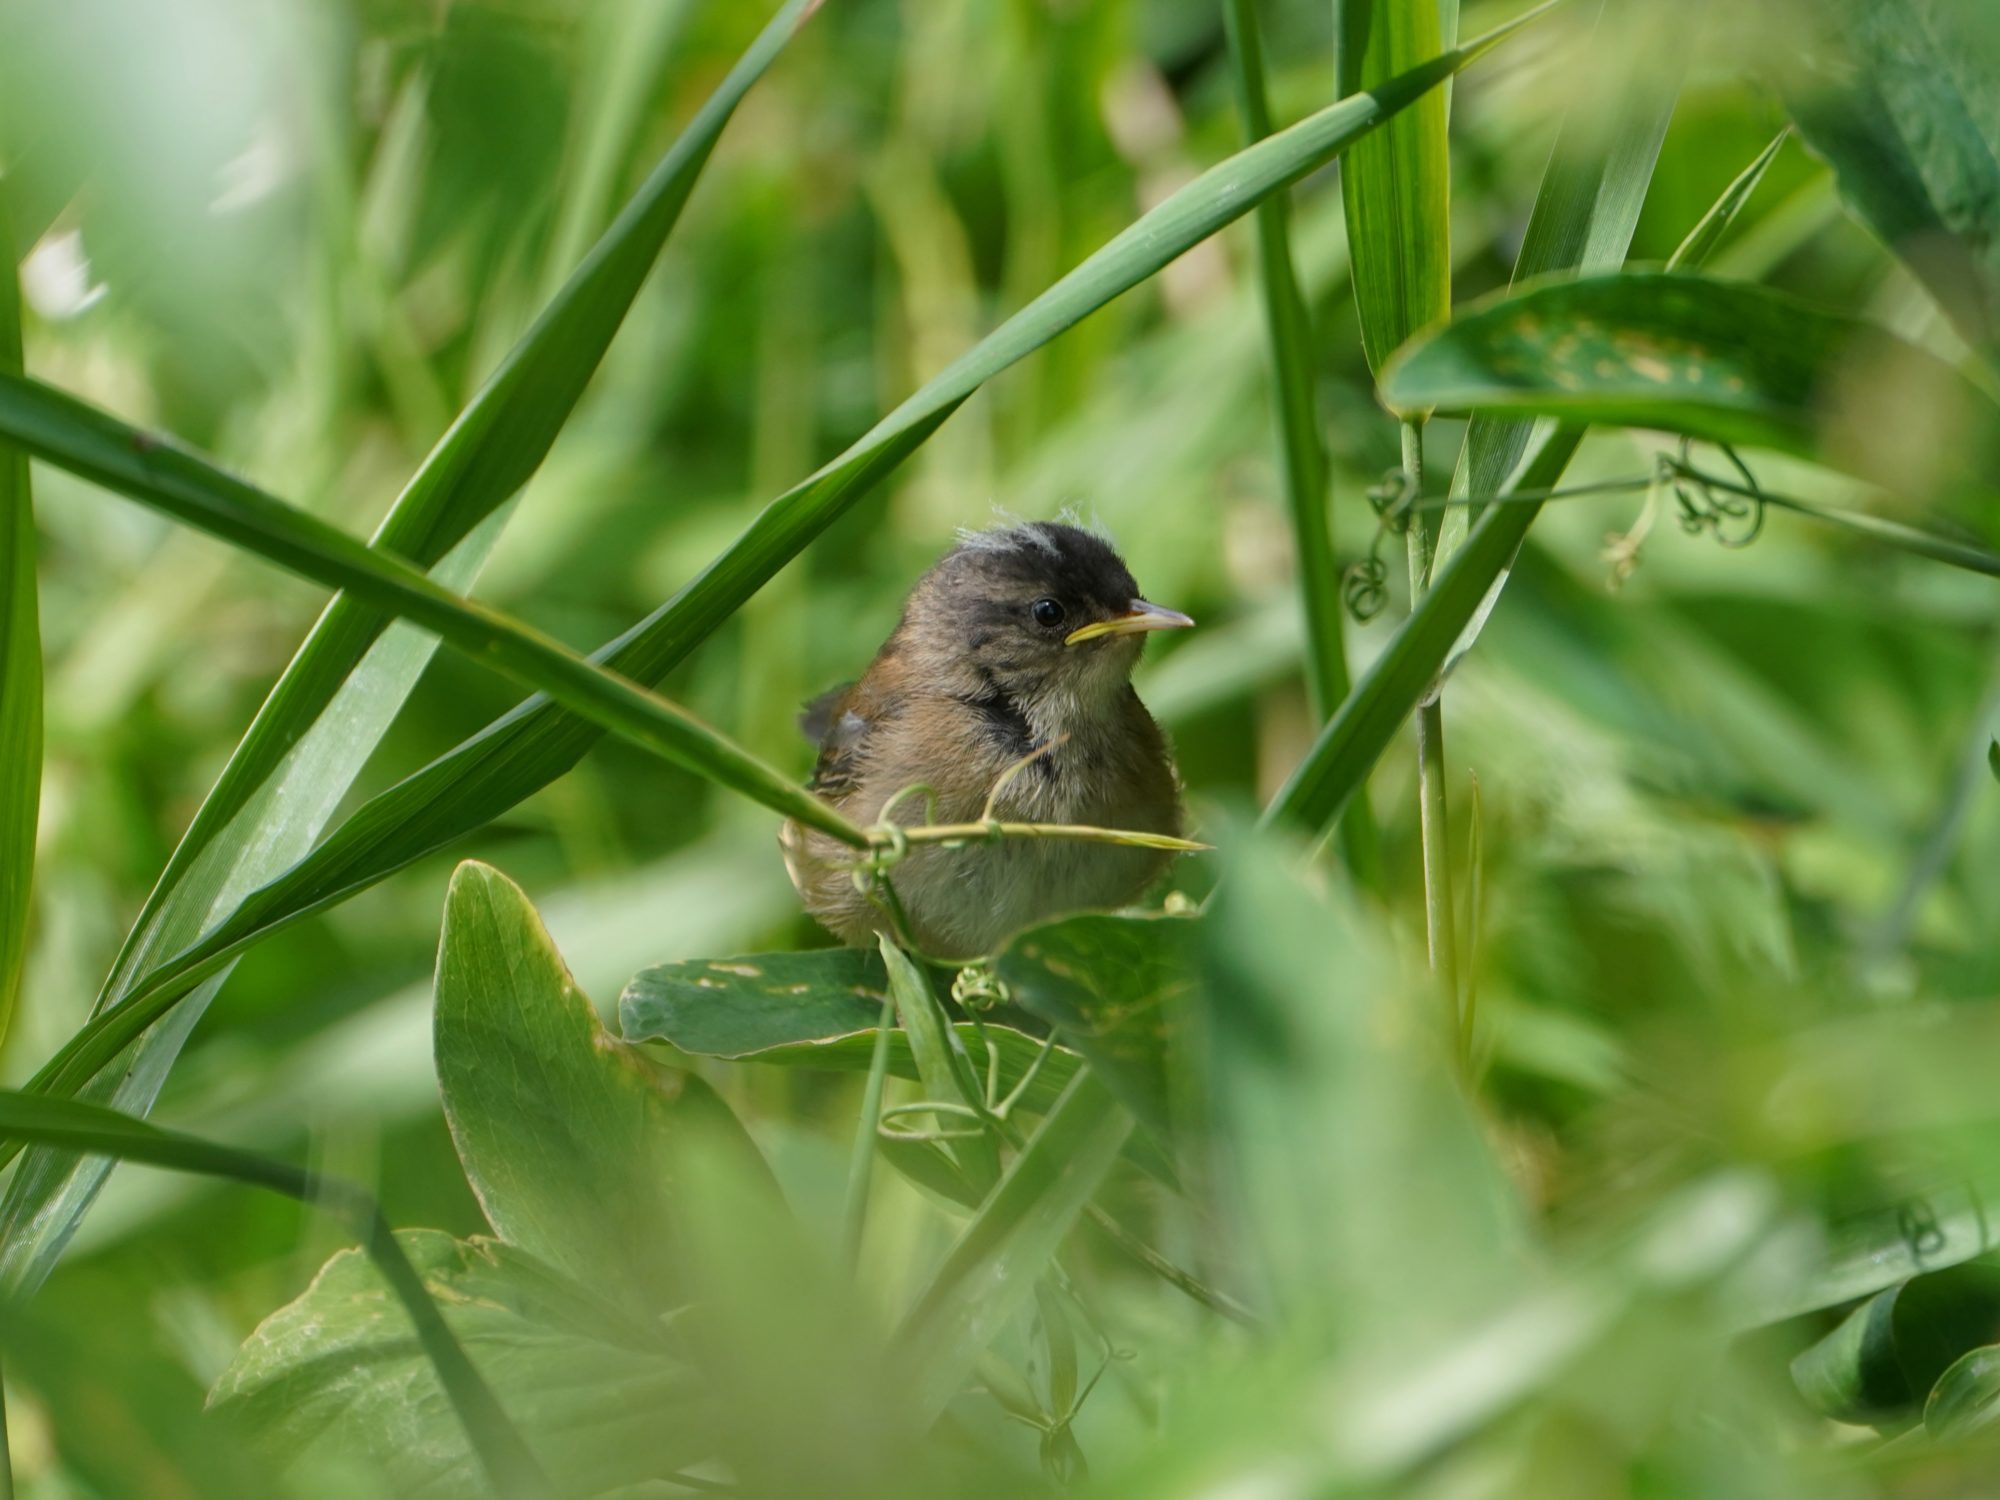 A fledgling Marsh Wren, partly hidden in the foliage. It has cute little white tufts on its head